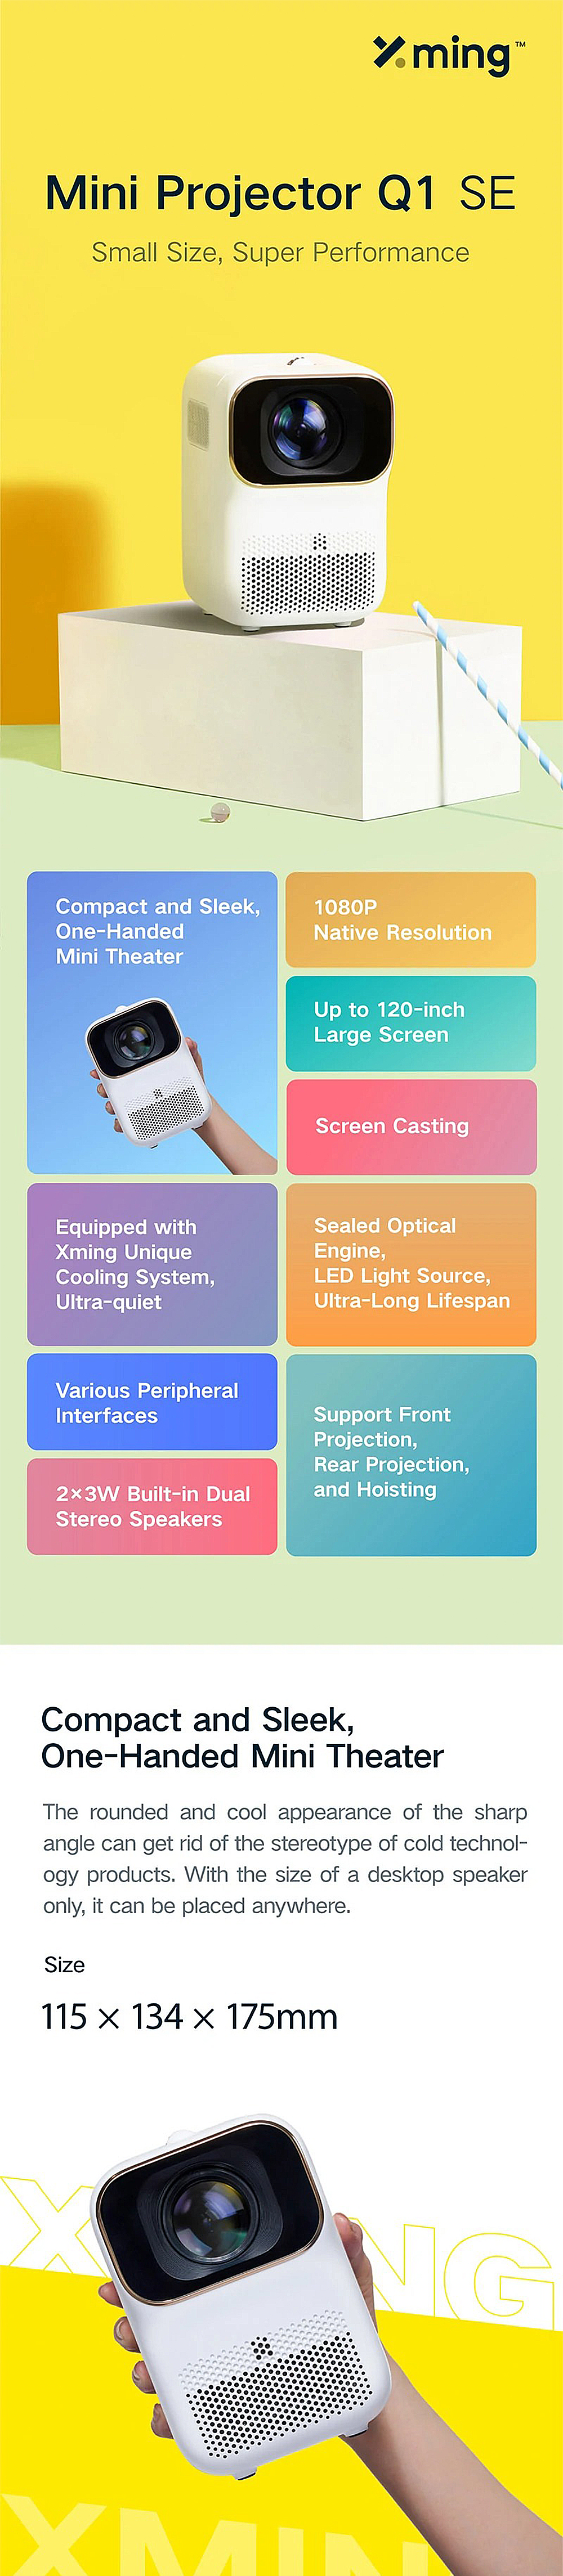 FENGMI-Xming-Q1SE-LED-Projector-250-Lumens-1080P-Resolution-Multiple-Ports-120-Inch-Screencast-Built-1971504-1